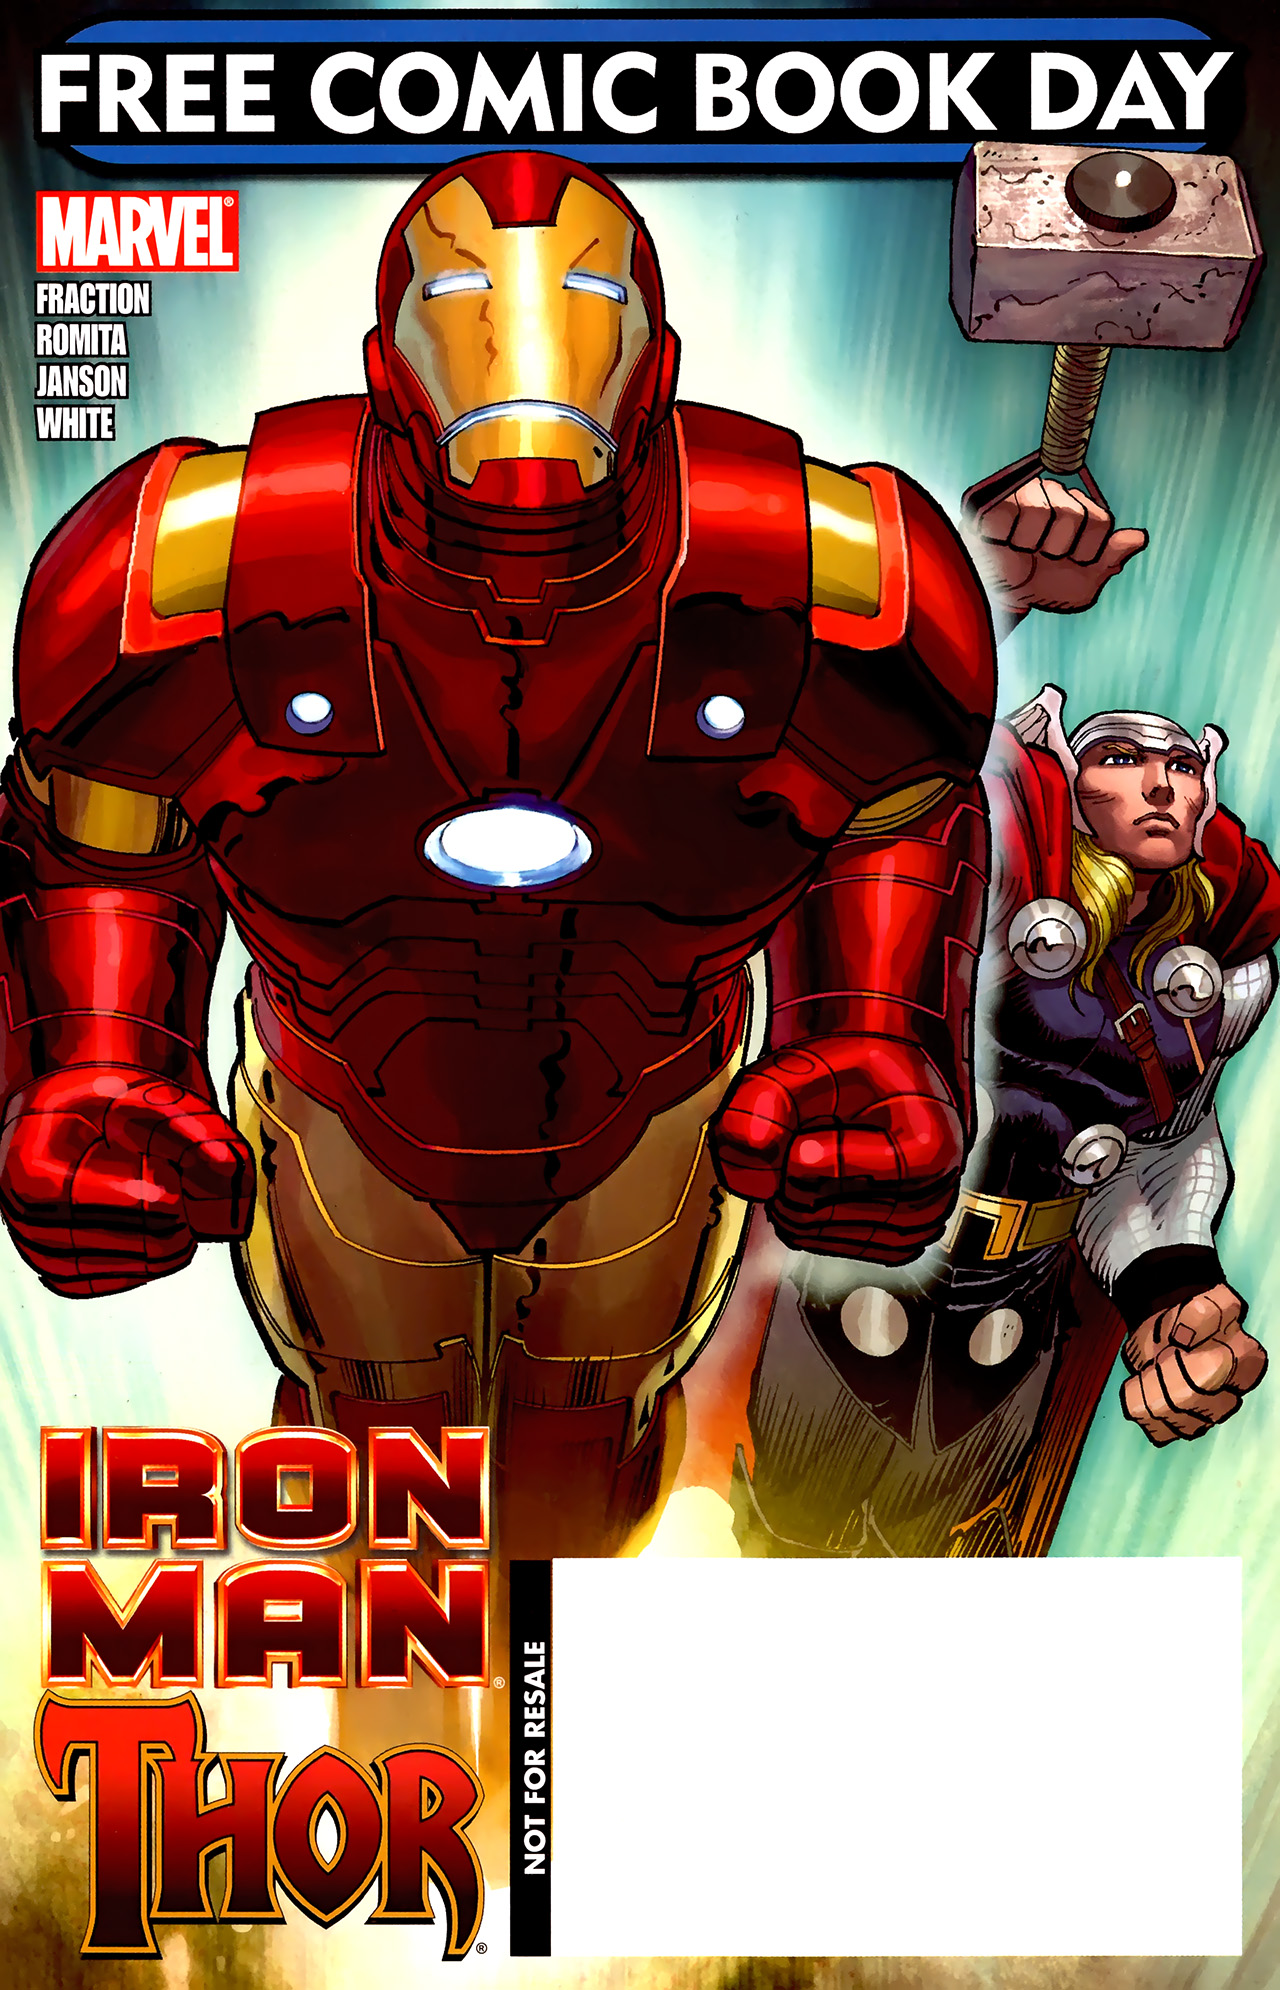 Read online Free Comic Book Day 2010 (Iron Man/Thor) comic -  Issue # Full - 1